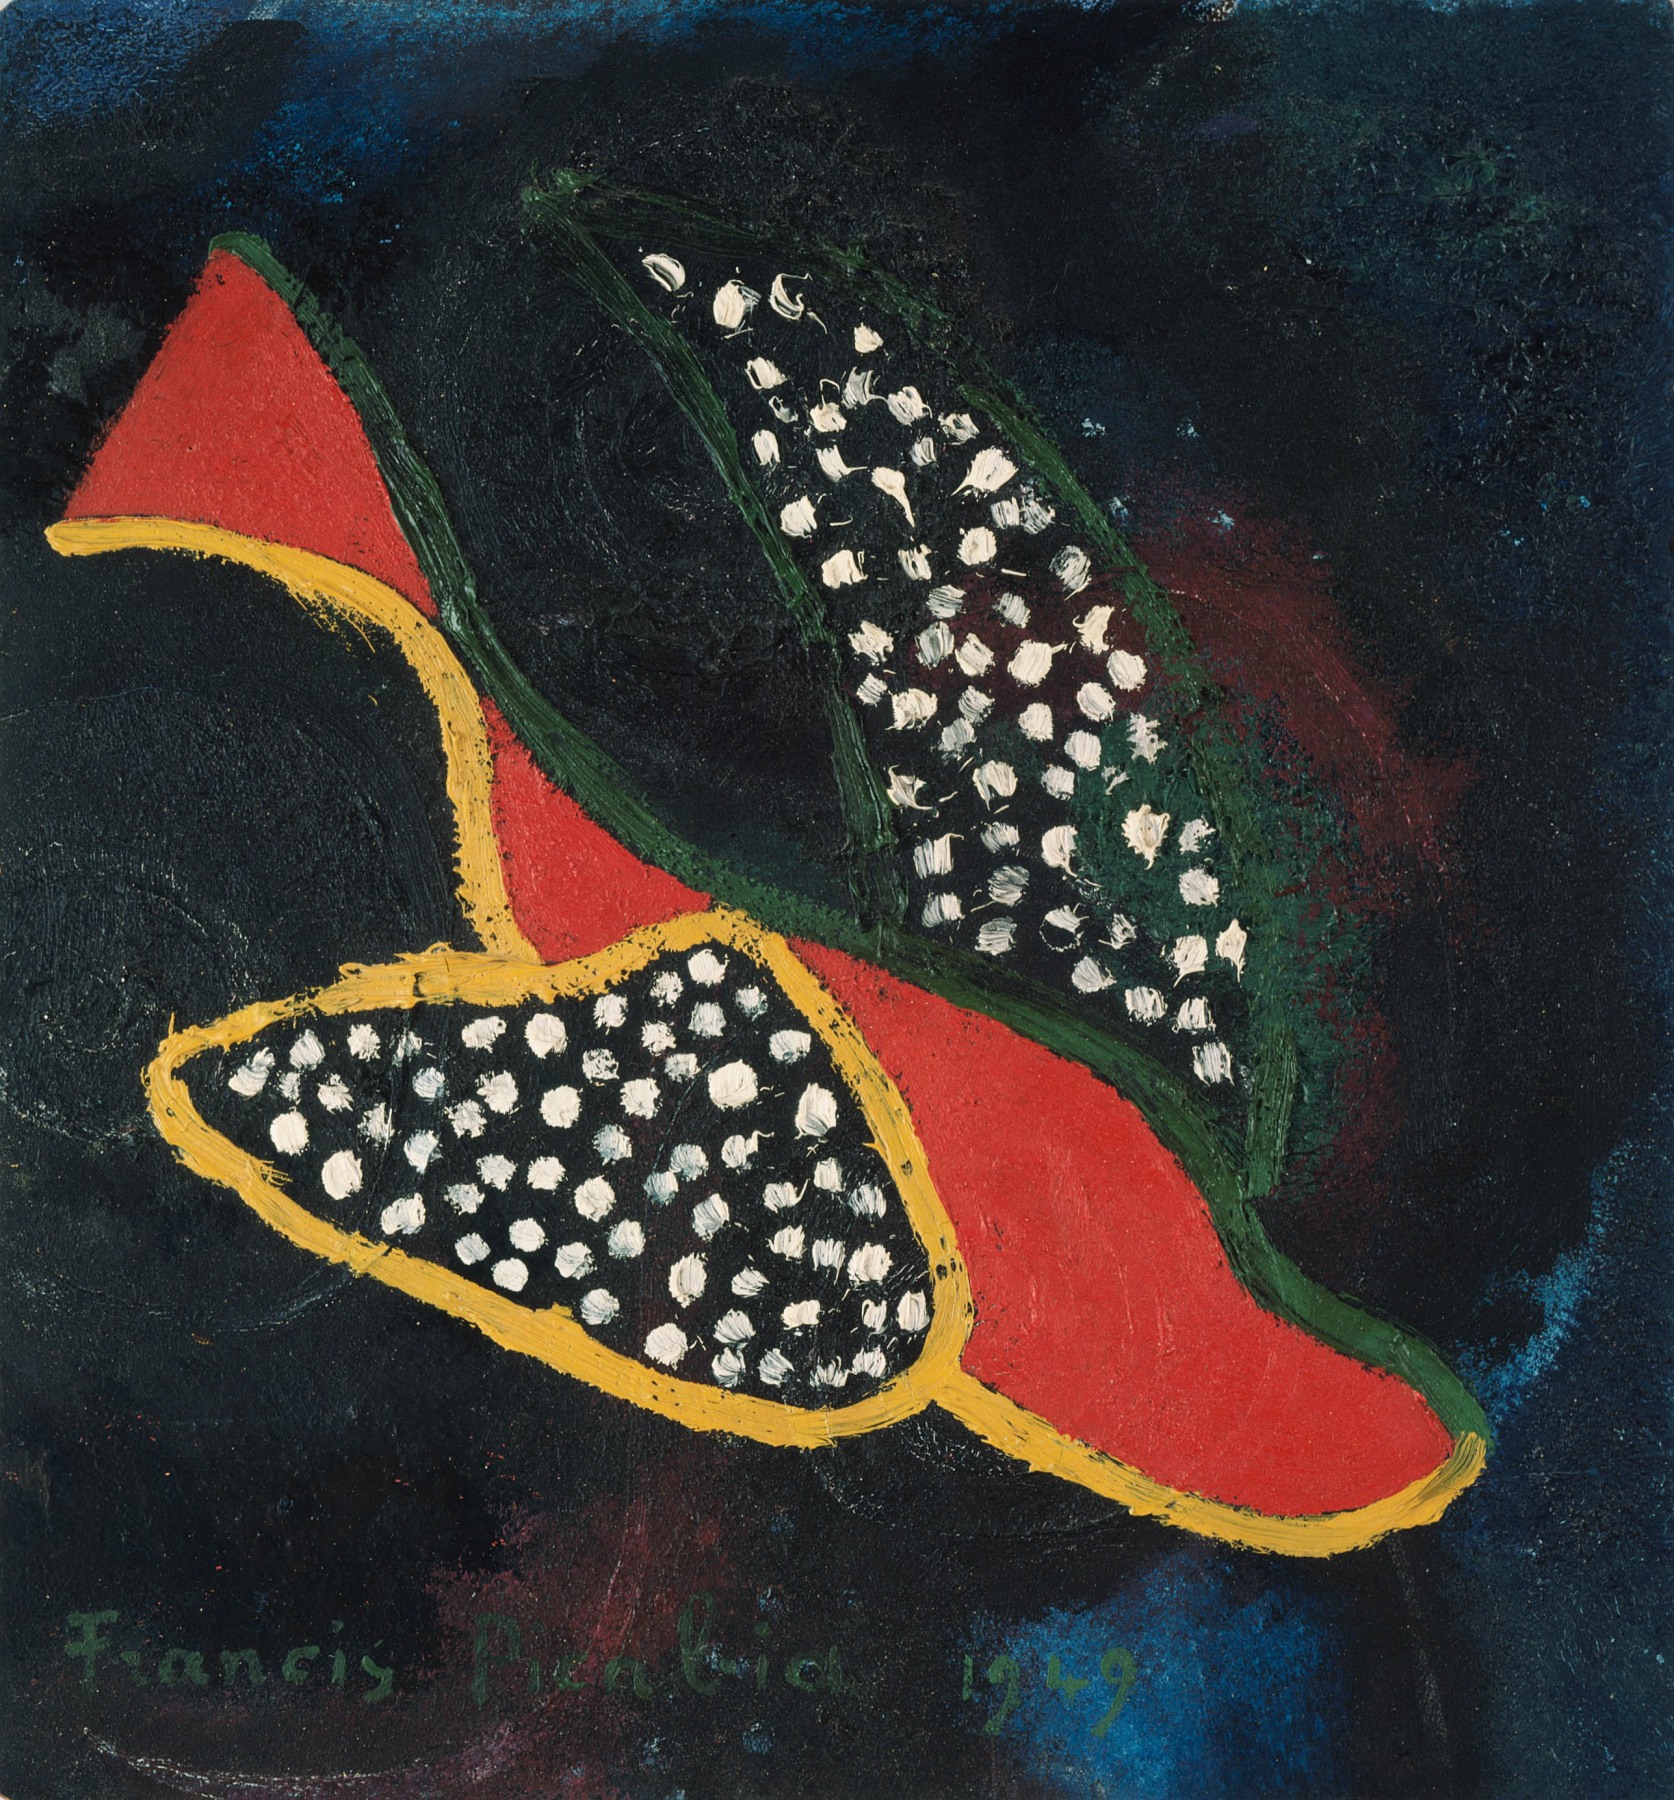 Francis Picabia
&amp;quot;Vol d&amp;#39;oiseau&amp;quot;, 1949
Oil on board
15 3/4 x 14 1/2 inches
40 x 37 cm
PIC 90